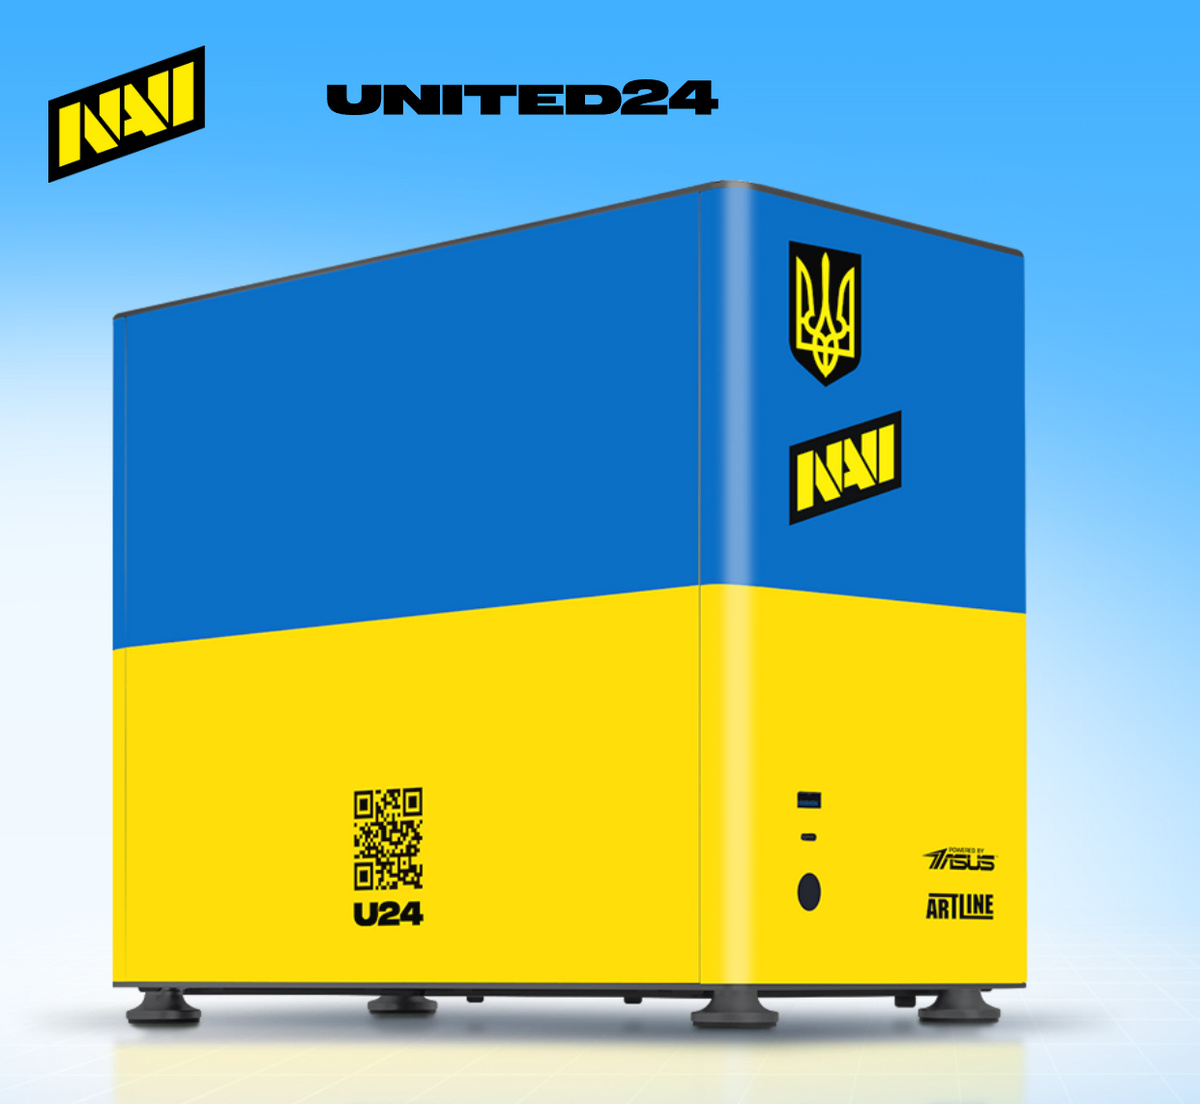 NAVI, ASUS and Artline raise funds to support Ukraine